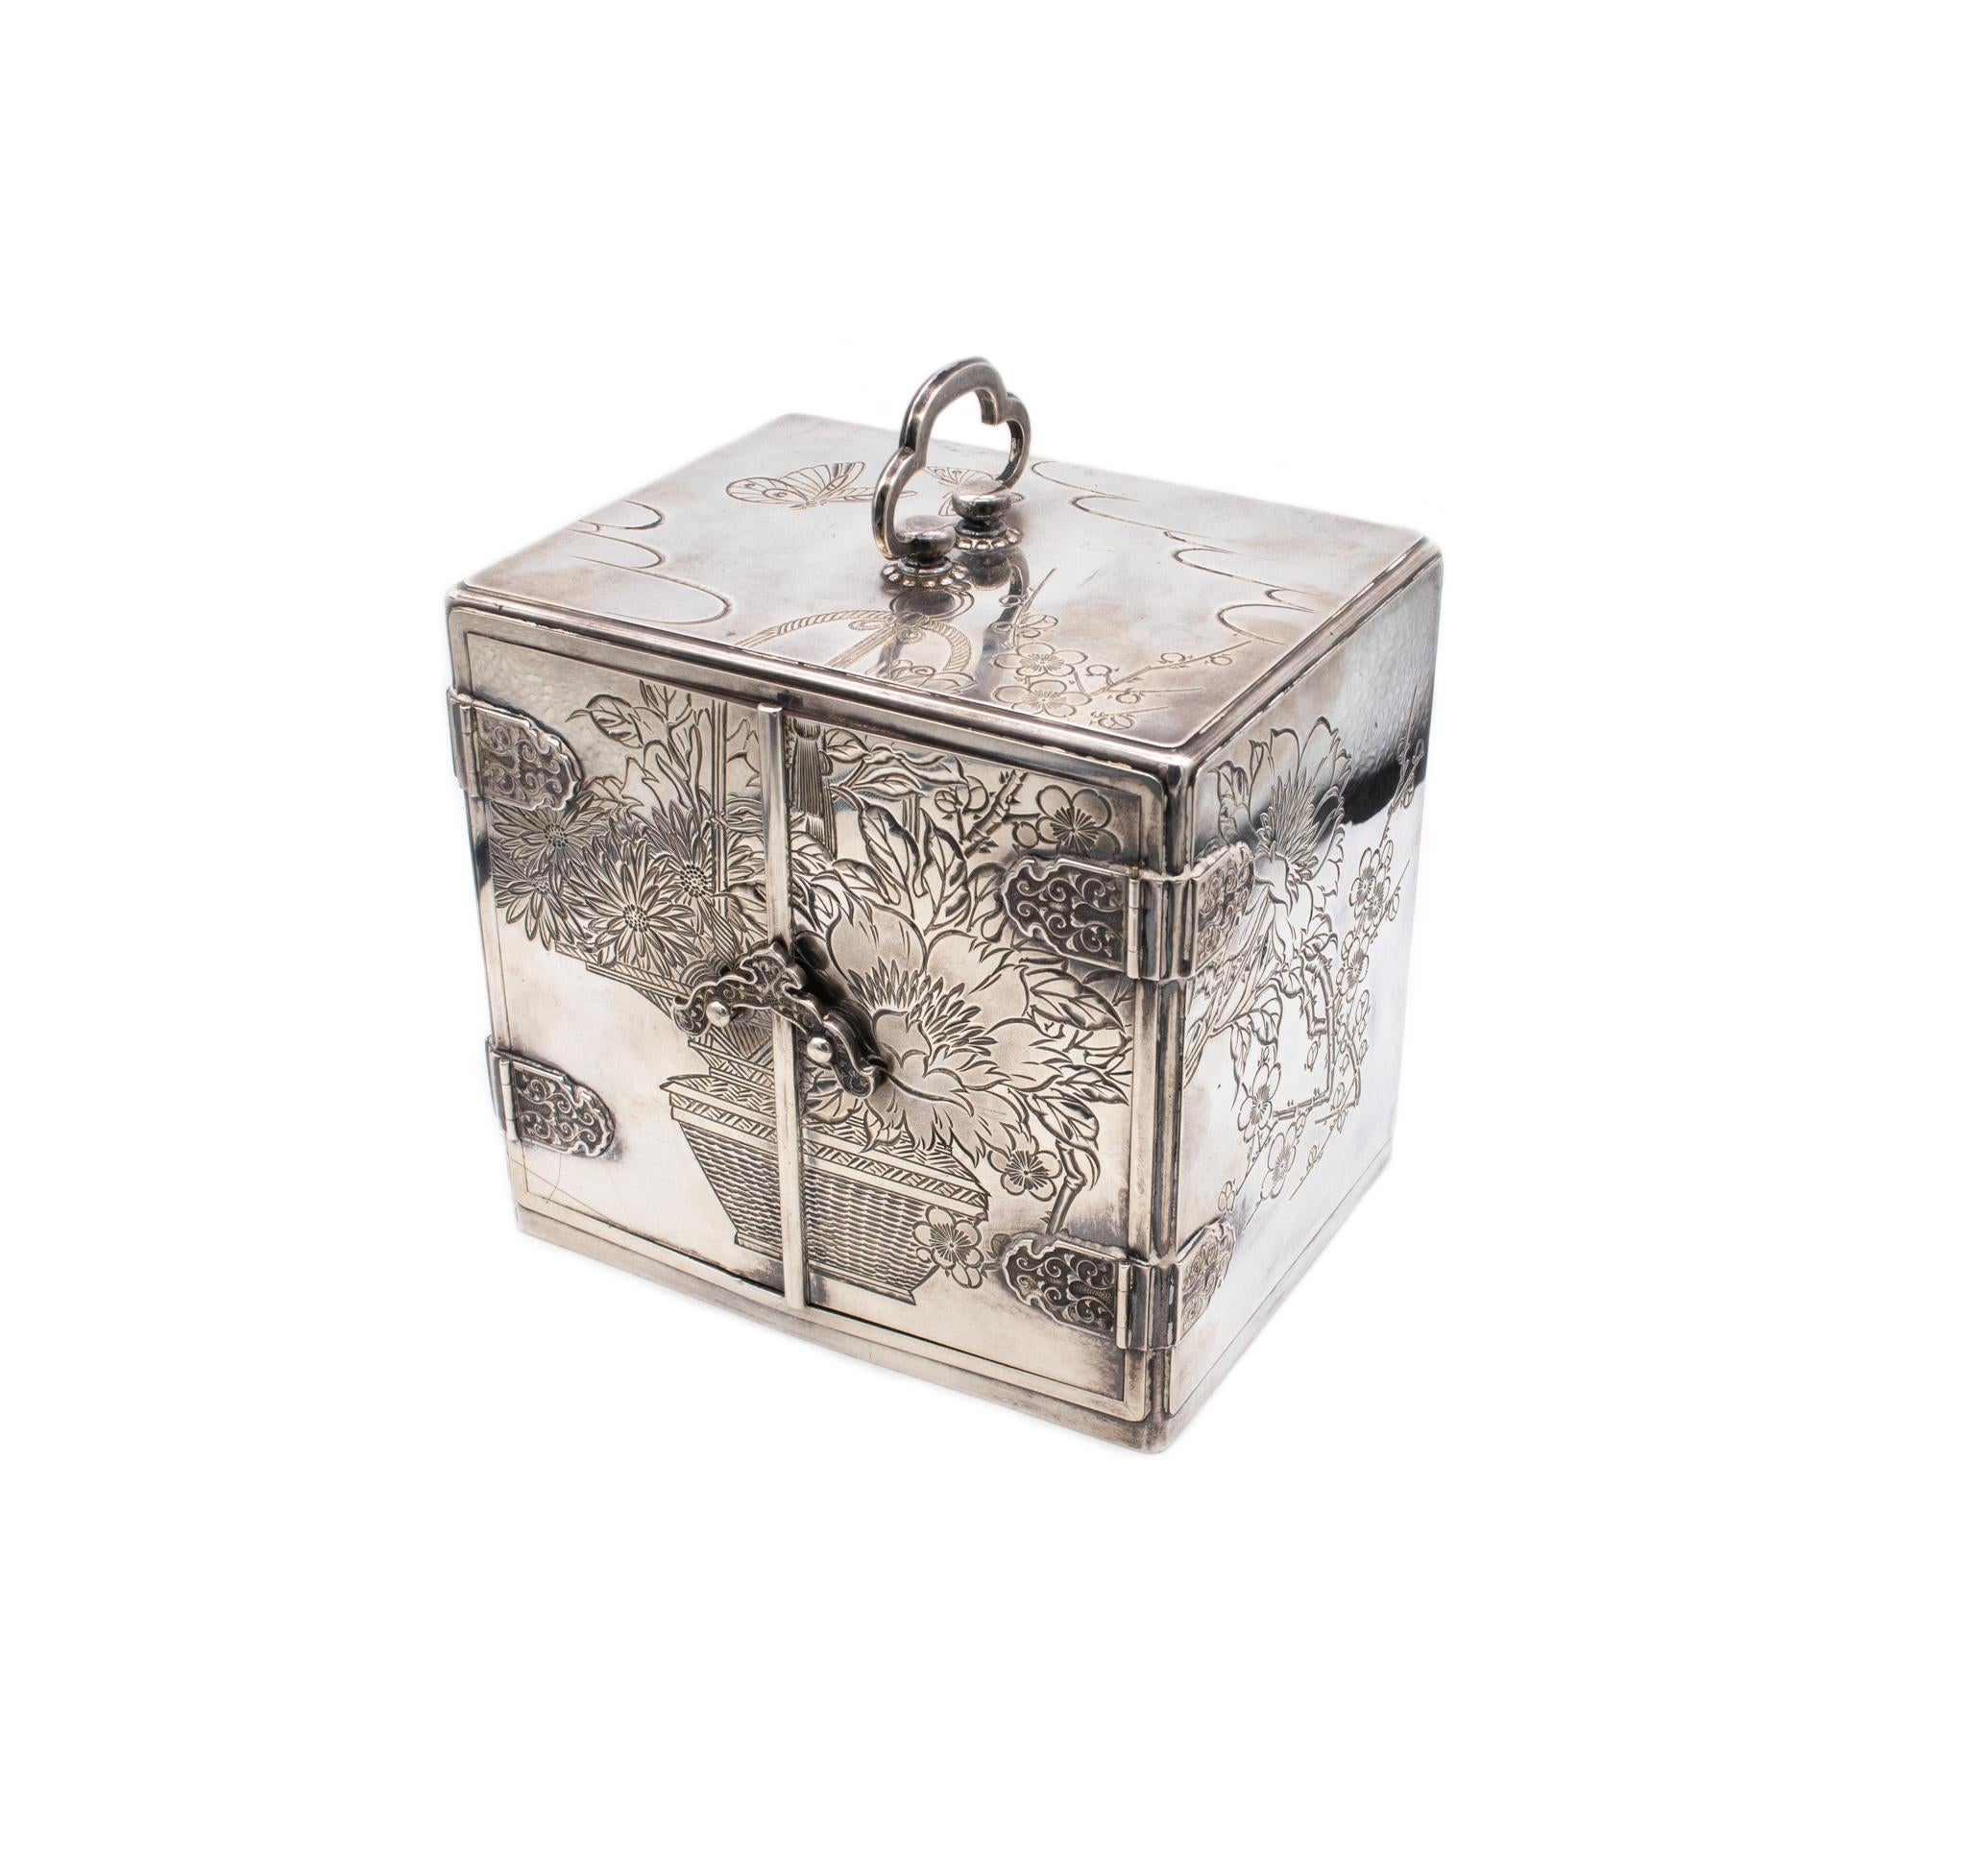 Japanese Japan Meiji Period 1868-1912 Jewel Box with Compartments Drawers Sterling Silver